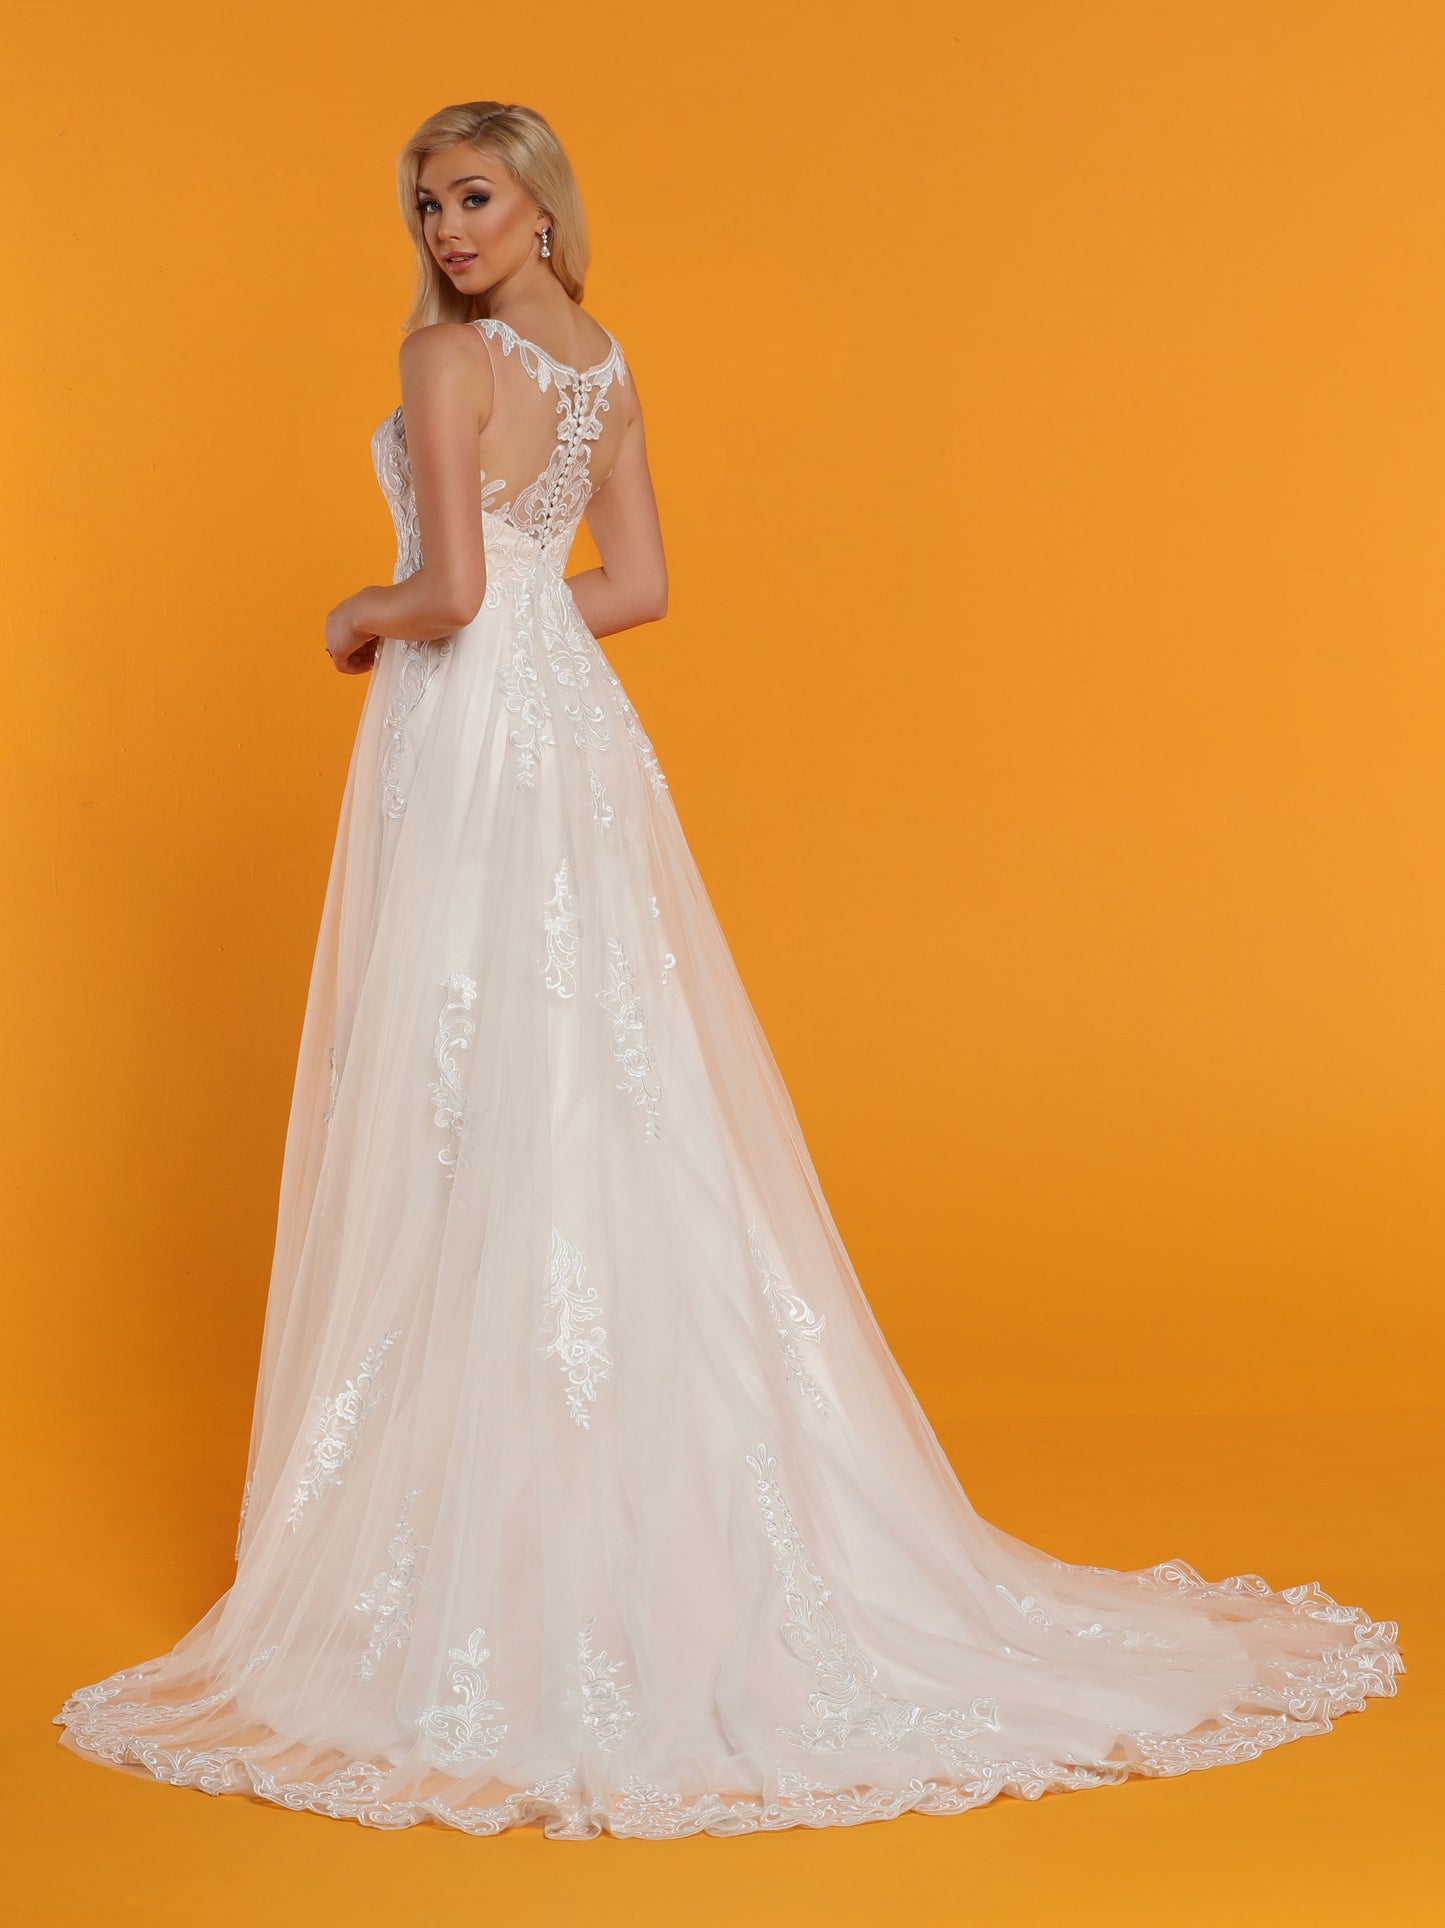 Davinci Bridal 50519 is a Tulle & Lace ballgown wedding dress with a sweetheart neckline with a sheer illusion high neckline with lace accents and sheer illusion lace back with a button lined seam. Lace Bodice Cascading into the full skirt with a lush lace hem & Edges along train.  Available for 1-2 Week Delivery!!!  Available Sizes: 2,4,6,8,10,12,14,16,18,20  Available Colors: Ivory/Blush, Ivory/Ivory